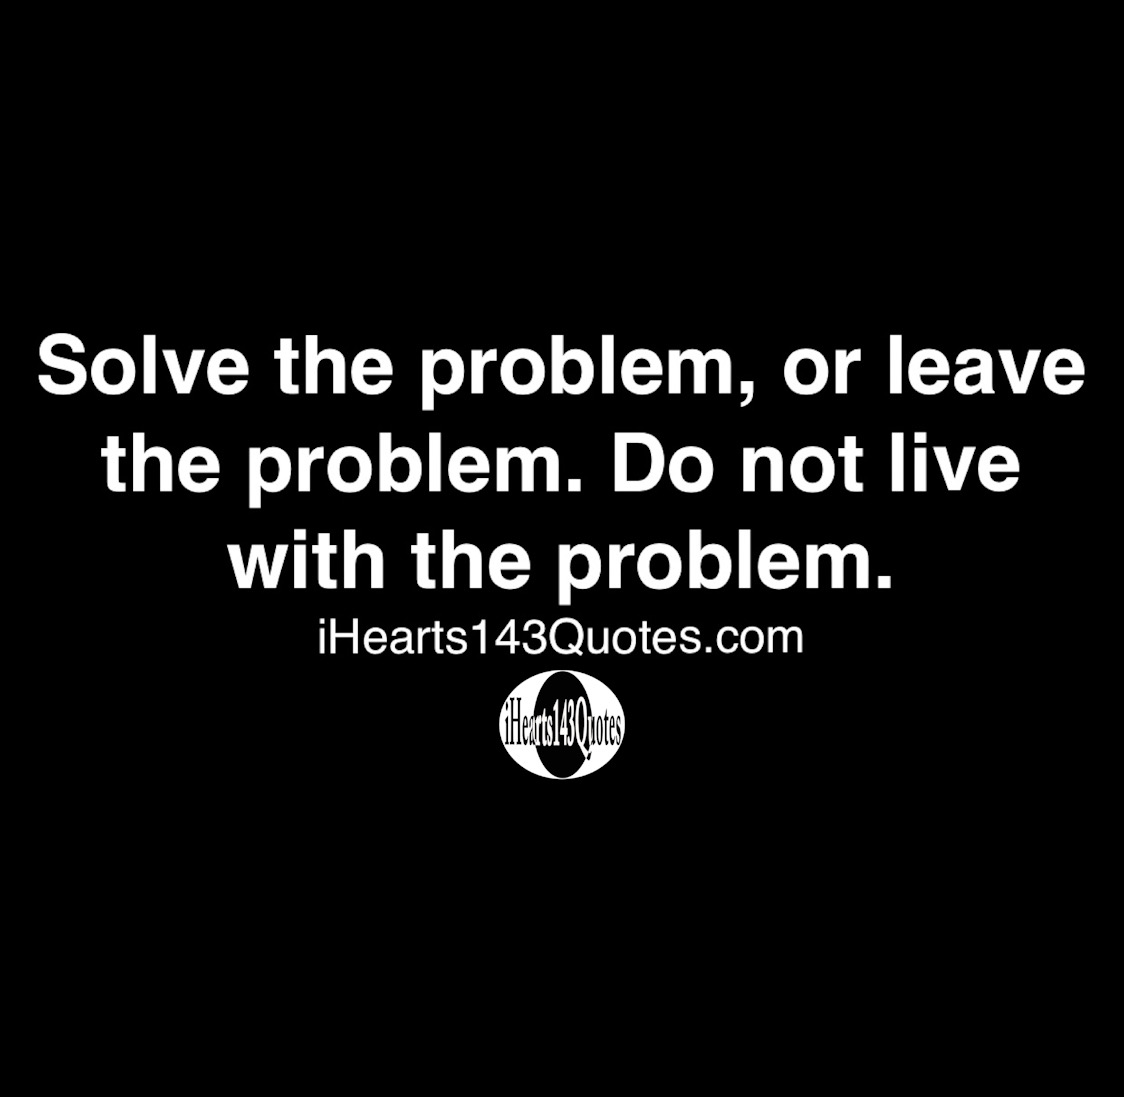 solve the problem or leave the problem quotes